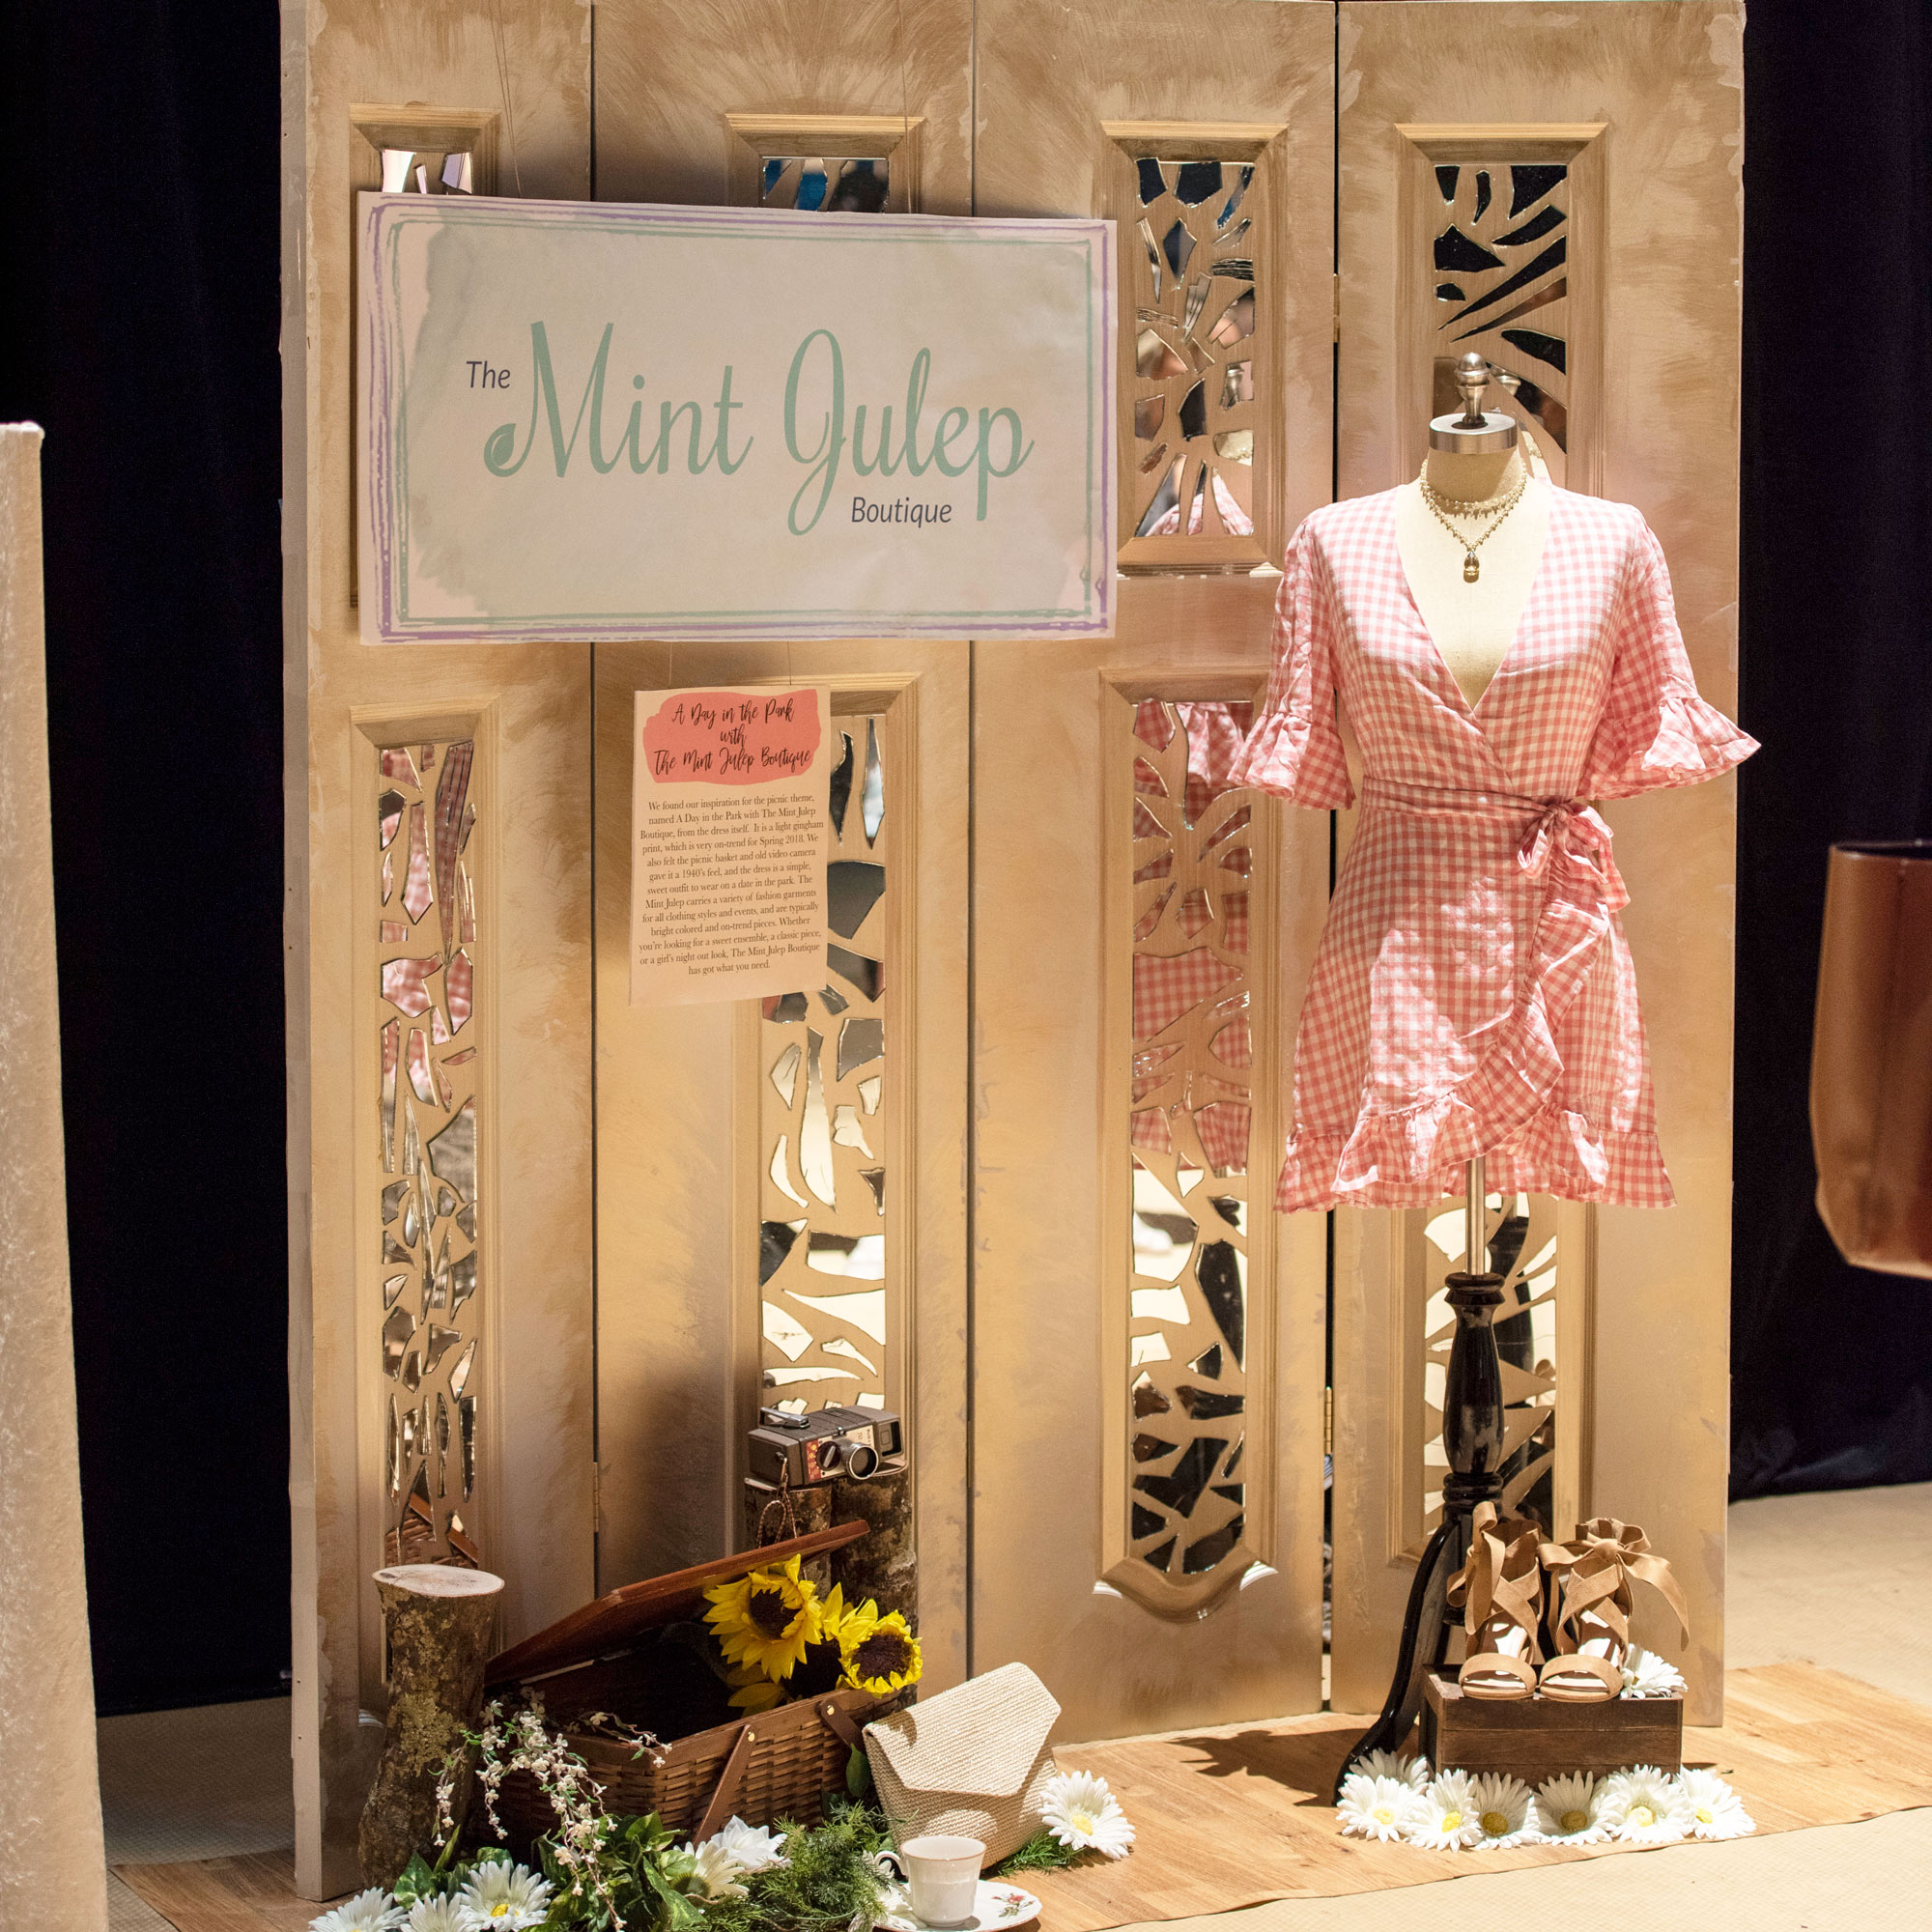 Apparel Merchandising Display from Mint Julep at The Fashion Event: Mod.